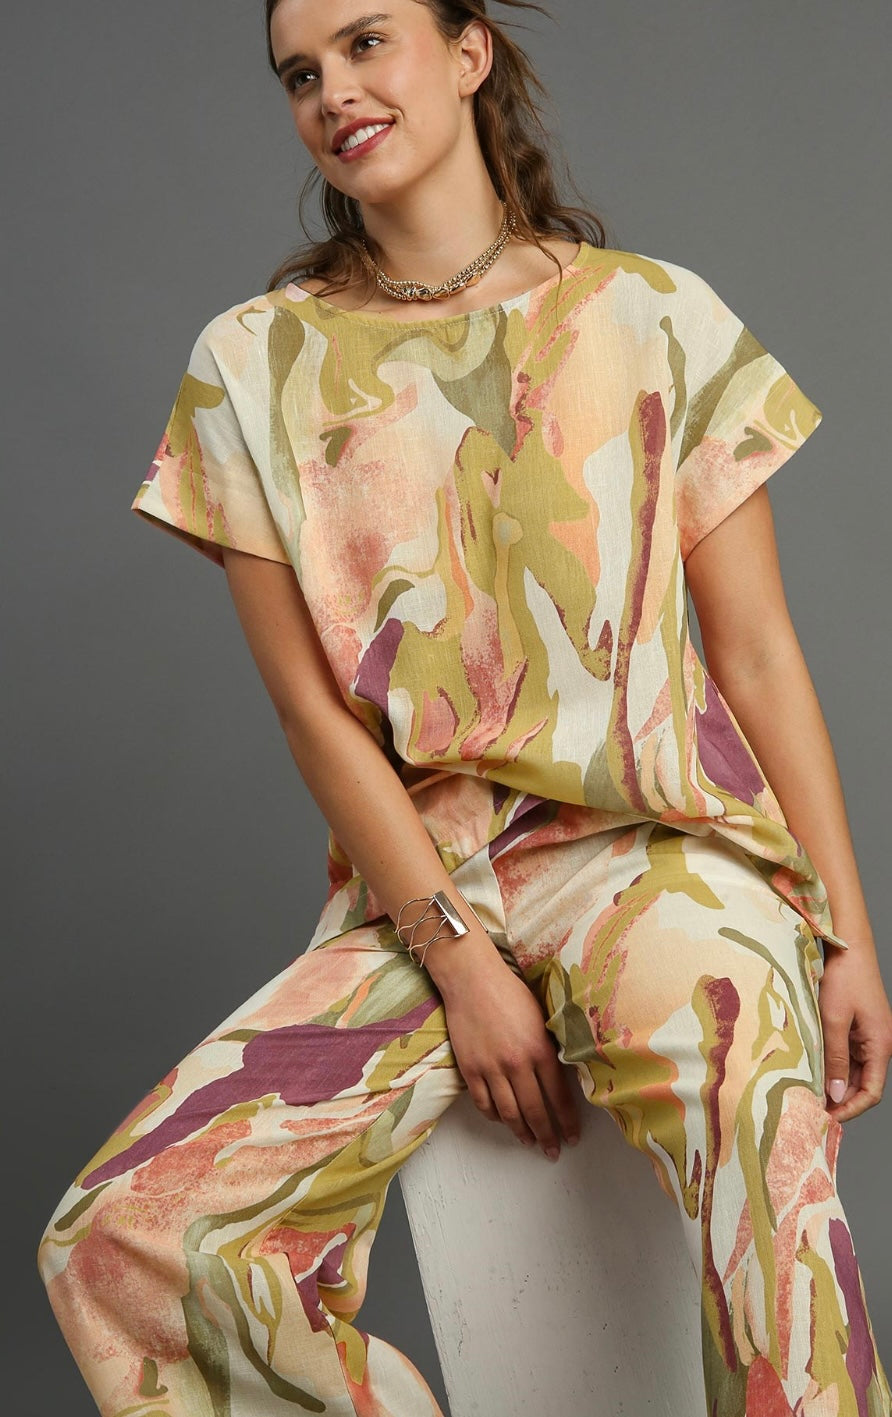 ABSTRACT PRINT SHORT SLEEVE PEACH TOP WITH TRIM DETAILS